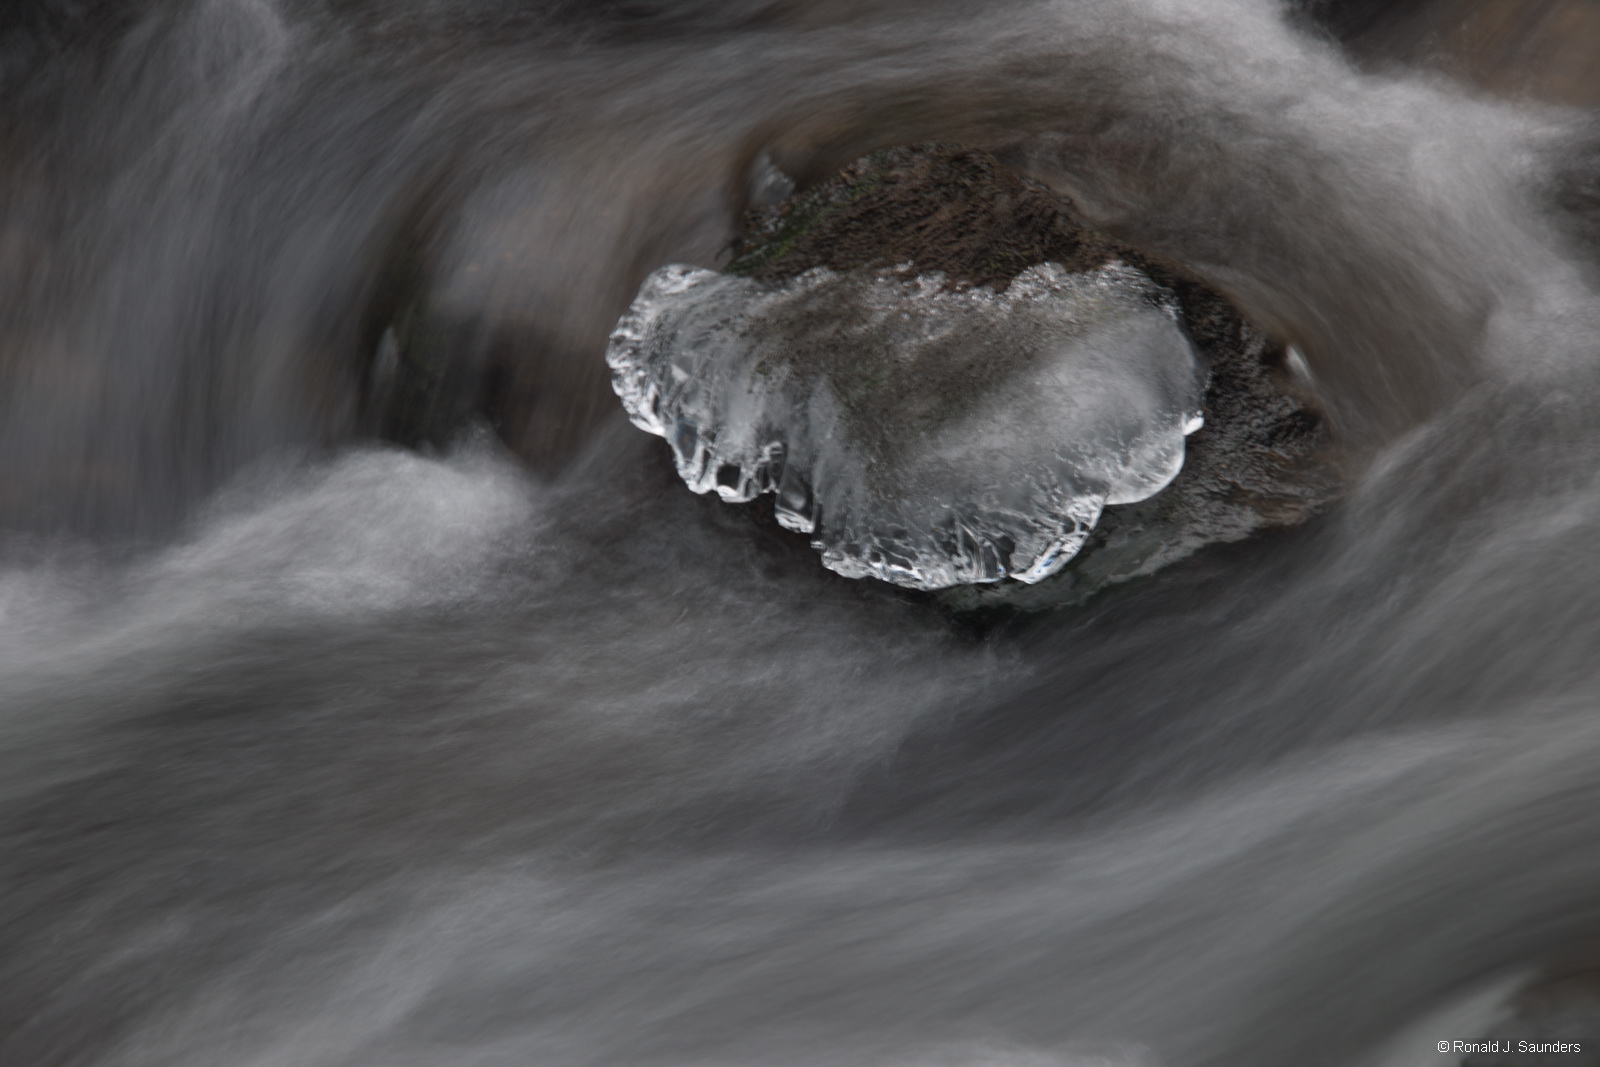 I took this image one rainy day in January. This water sculptured ice had been washed away by high water the next day. The Merced...